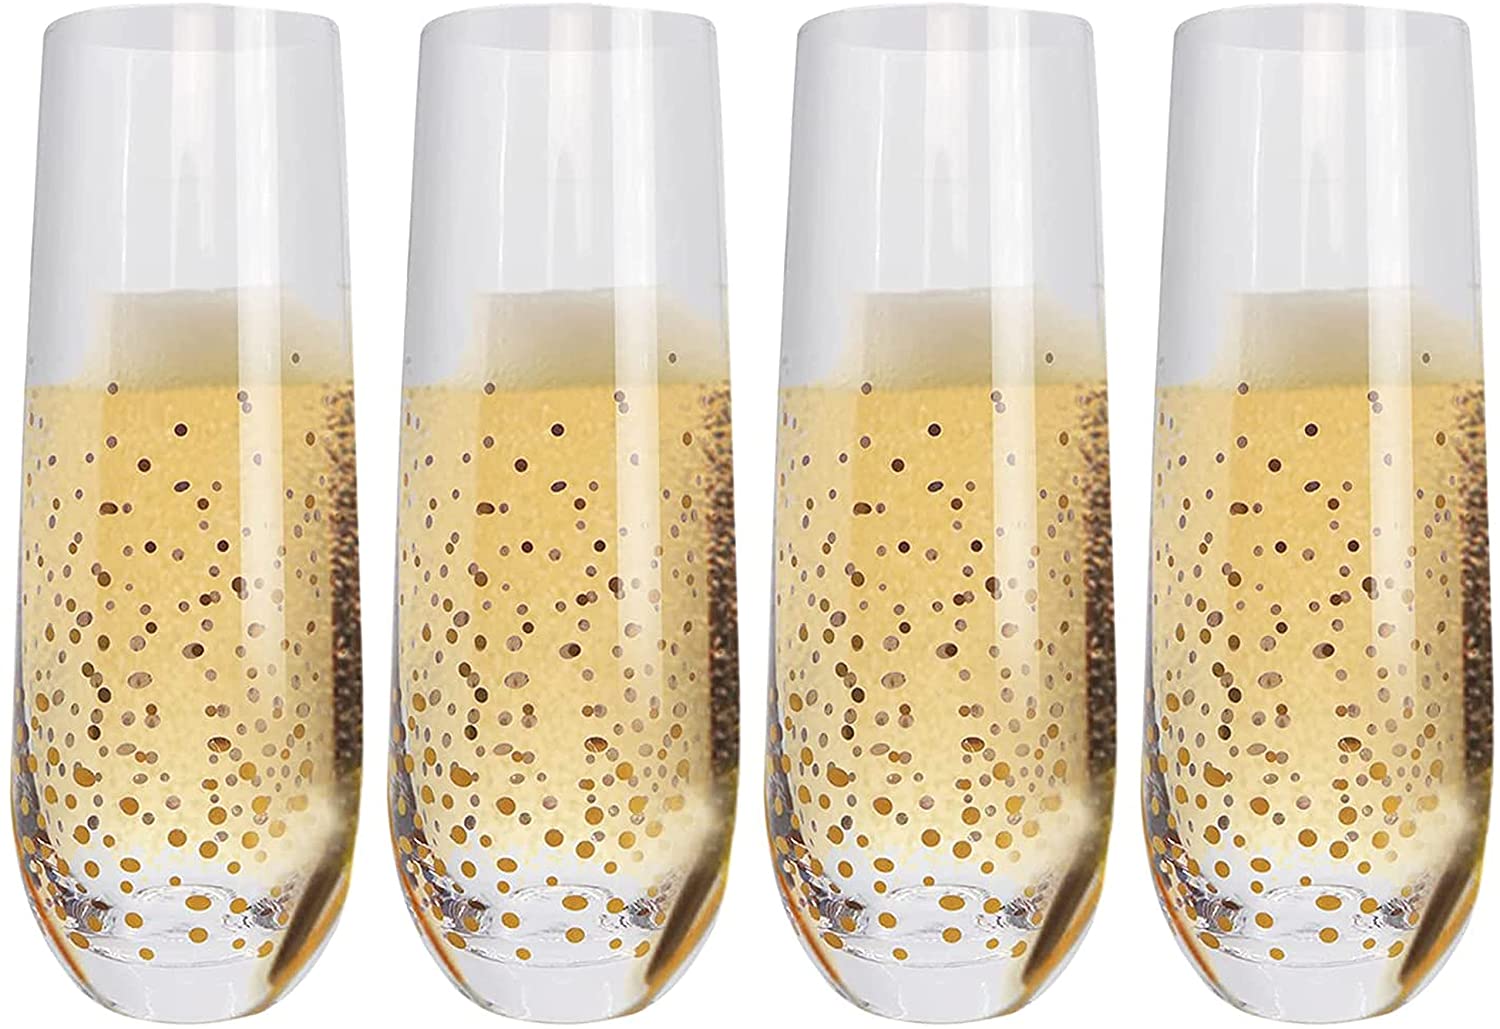 Lulie Stemless Champagne Glass Flute + Reviews